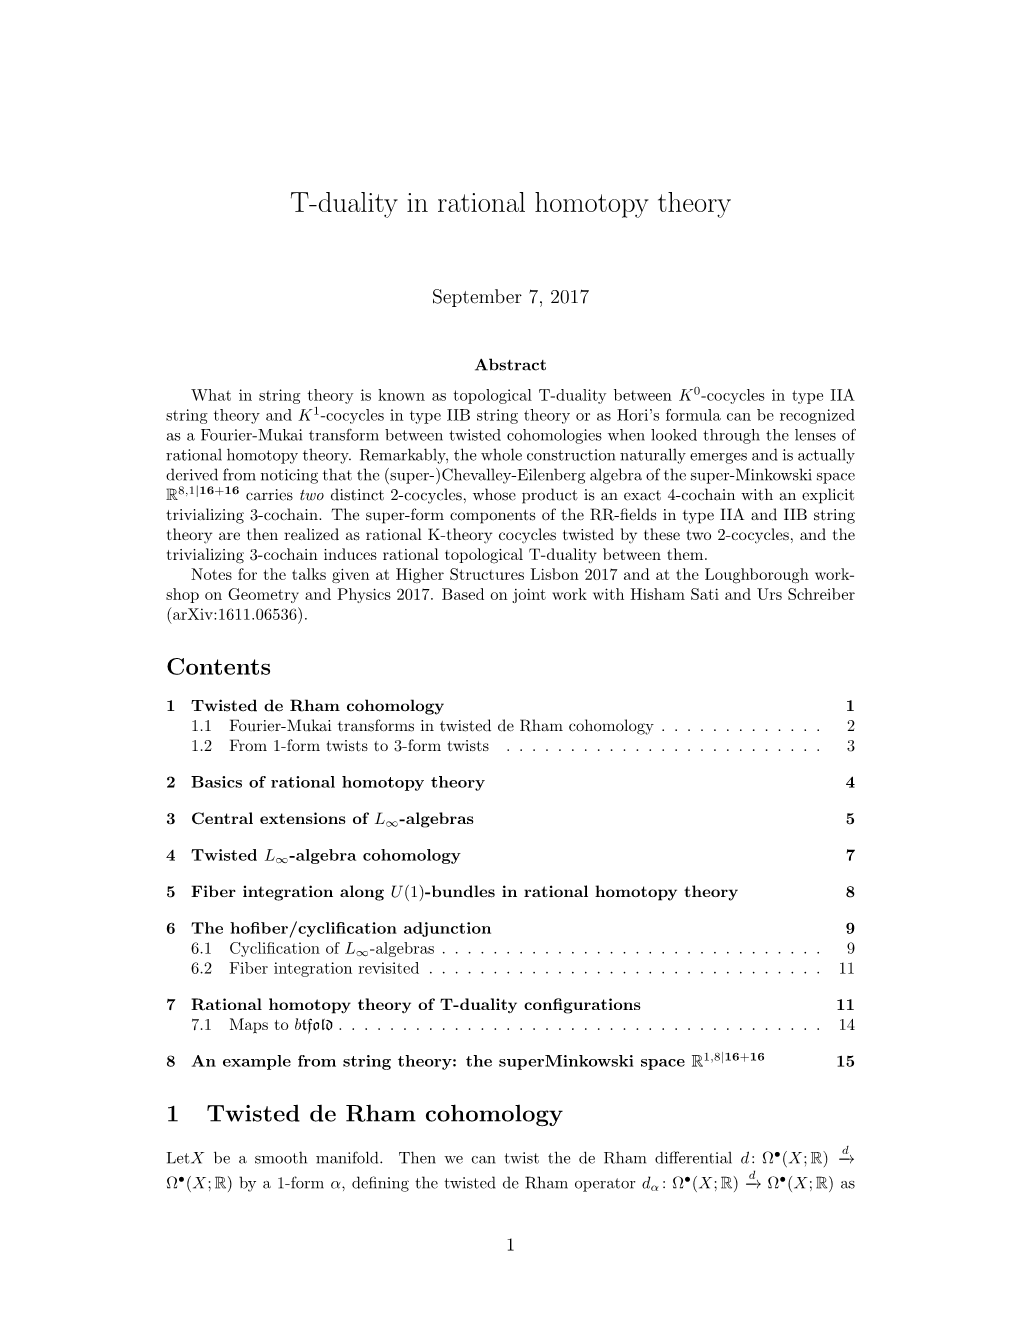 T-Duality in Rational Homotopy Theory